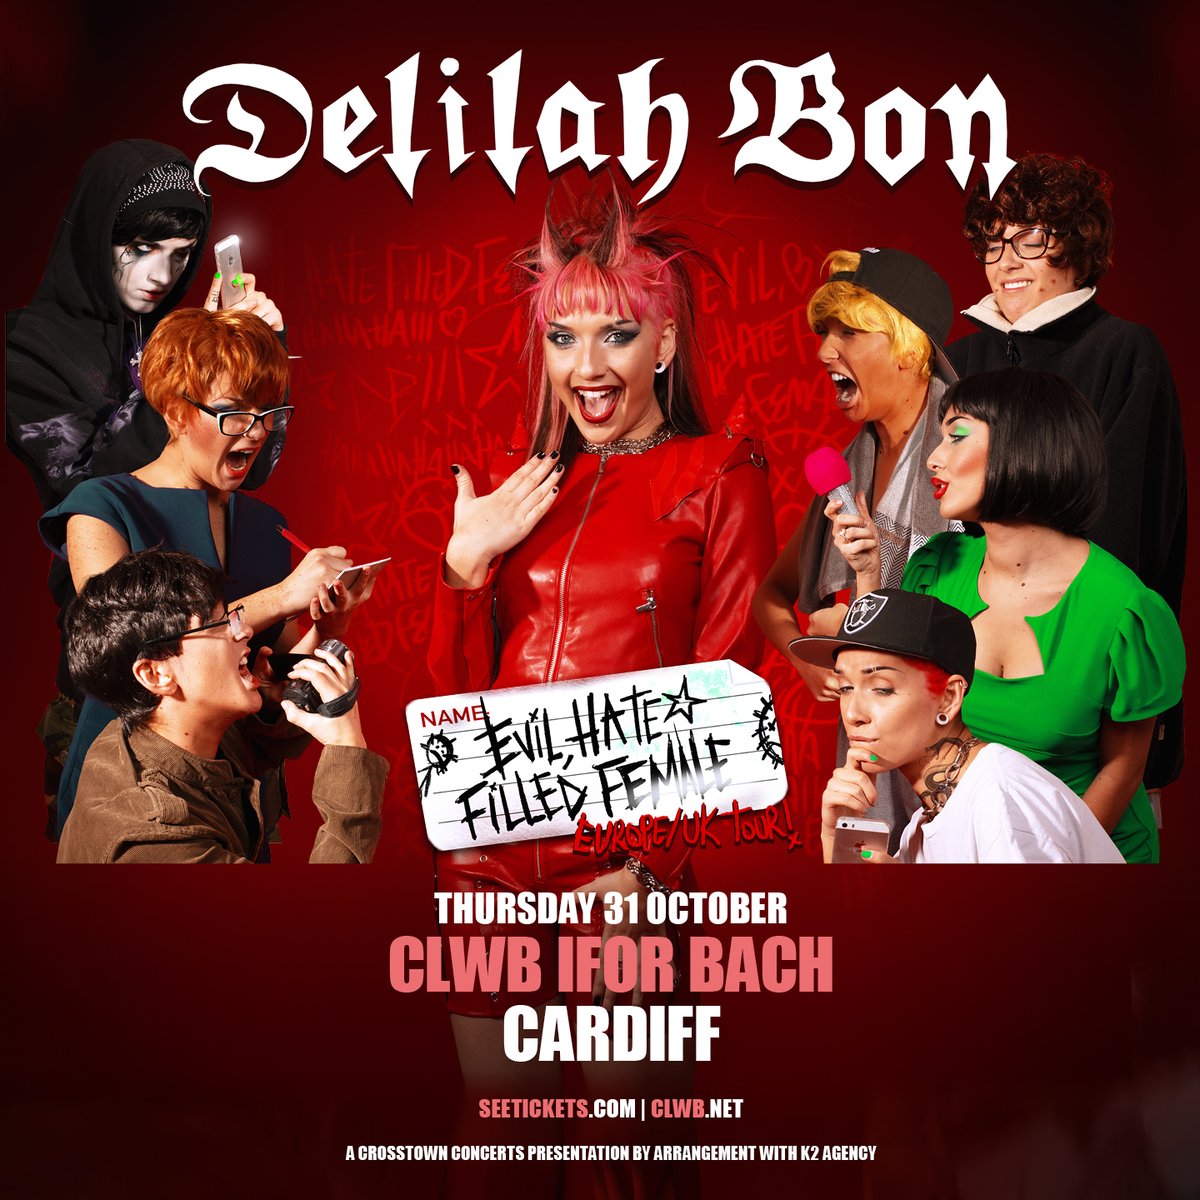 .@DelilahBon_ plays @ClwbIforBach on Thursday 31st October. Tickets are on sale Monday 20th May at 10am: crosstownconcerts.seetickets.com/event/delilah-…